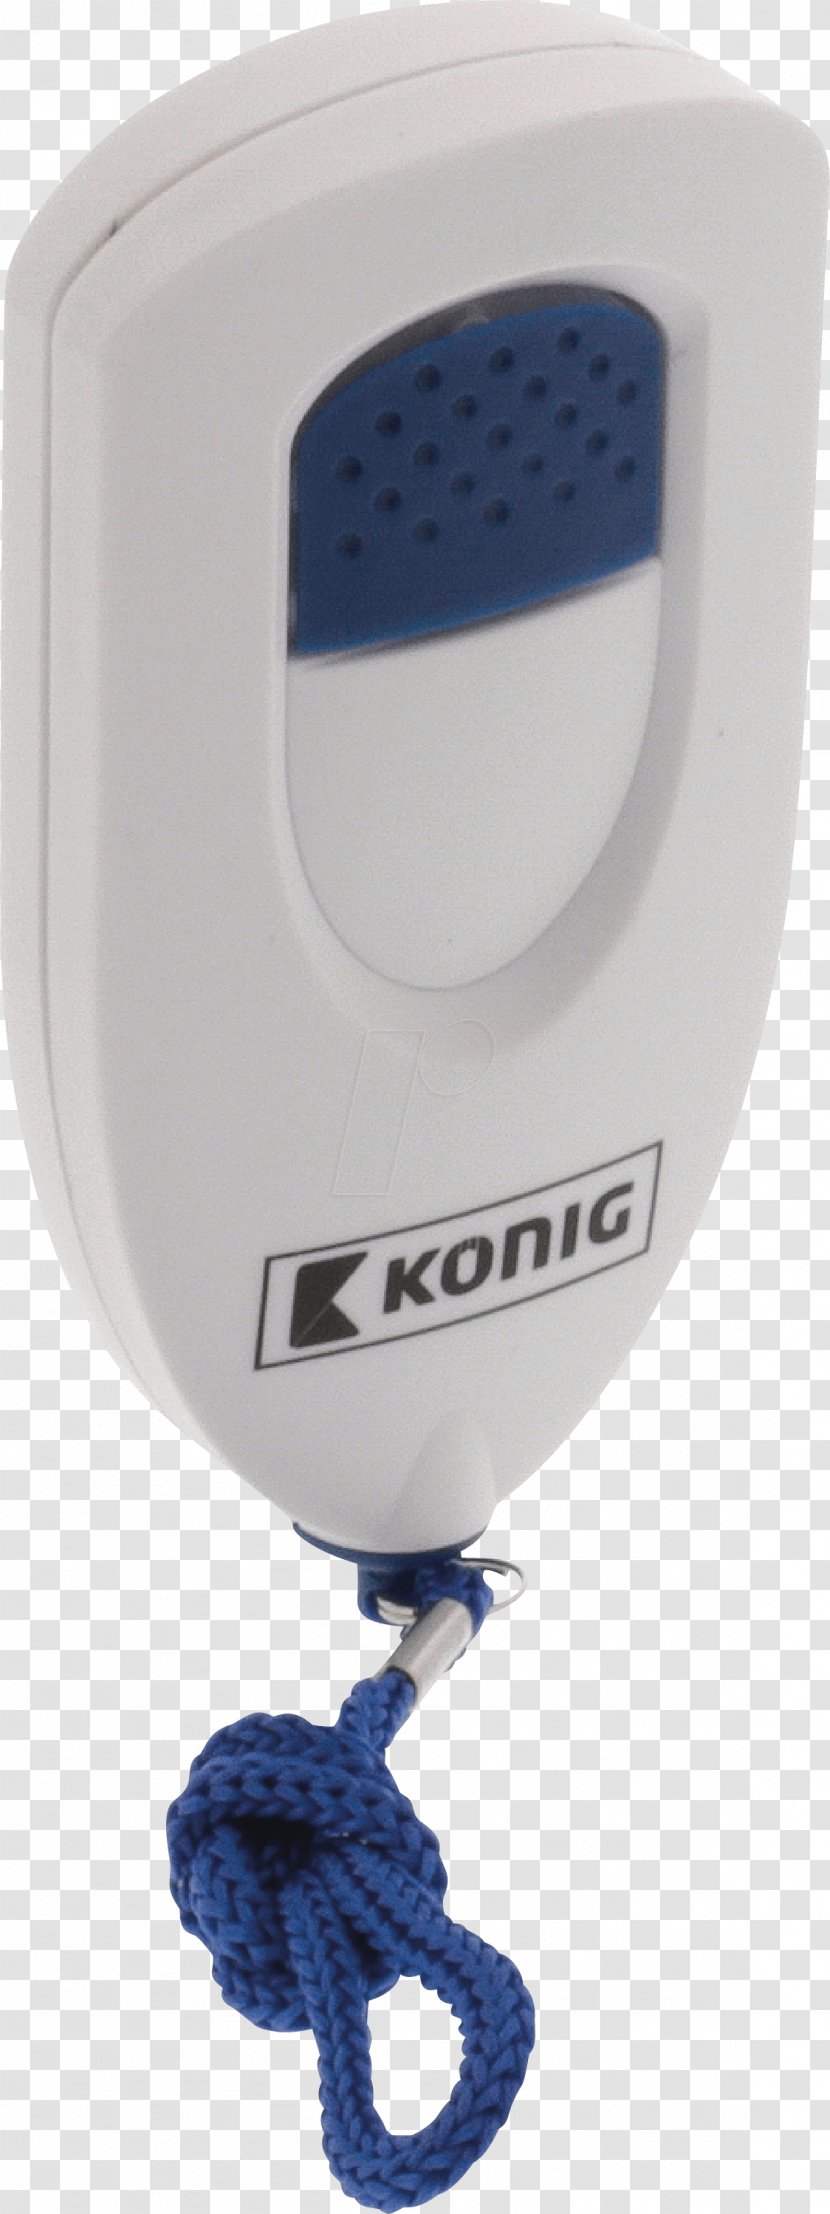 Security Alarms & Systems Alarm Device Siren King Industrial Design Transparent PNG